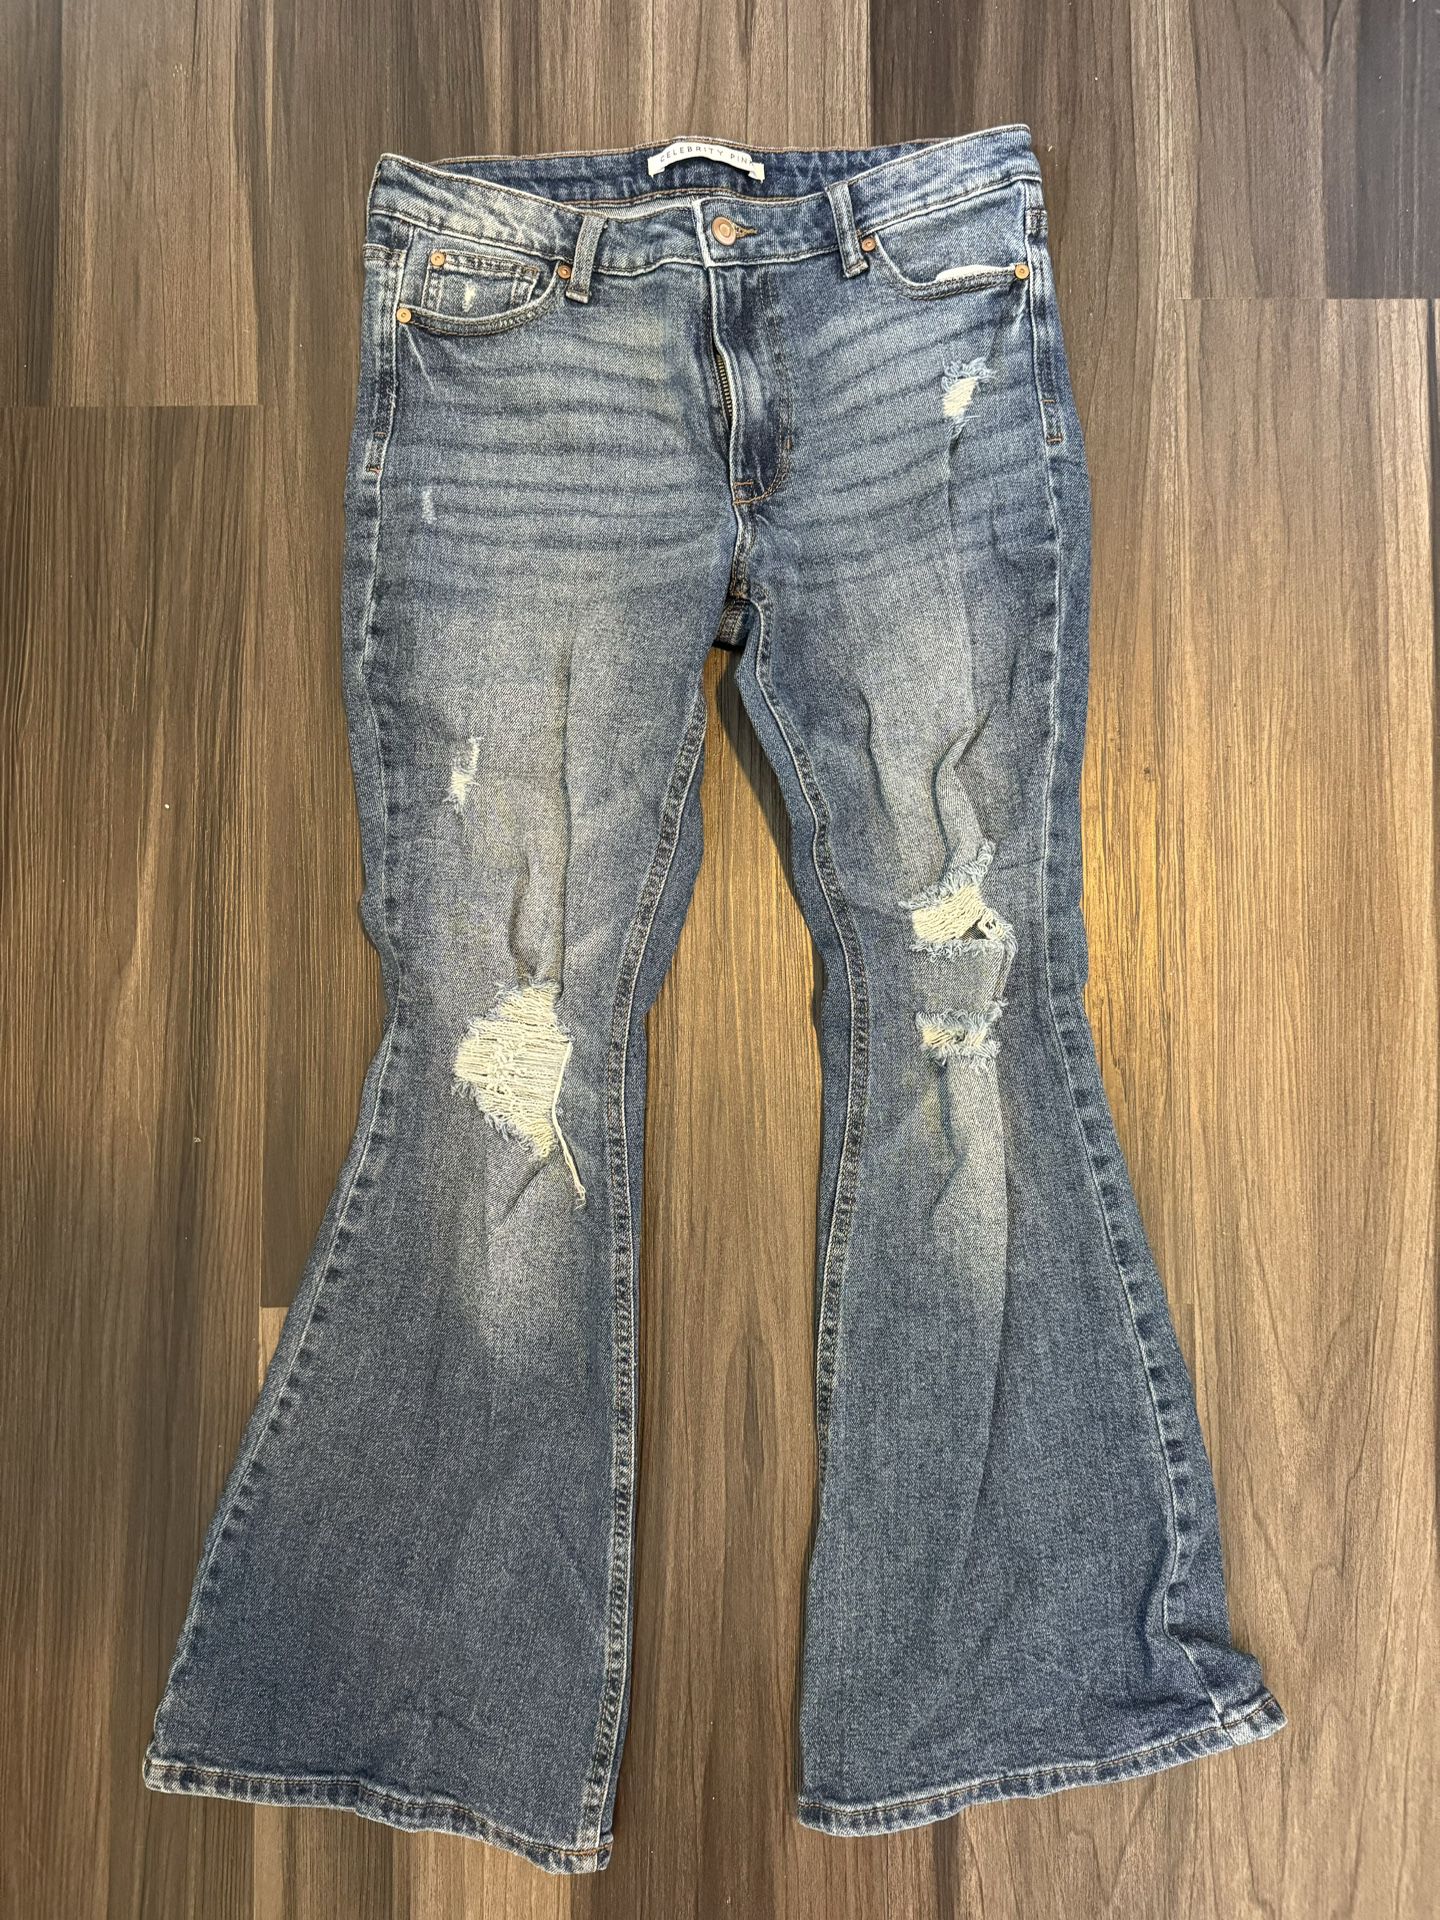 Flare Medium Wash Low Rise Jeans for Sale in Chula Vista, CA - OfferUp